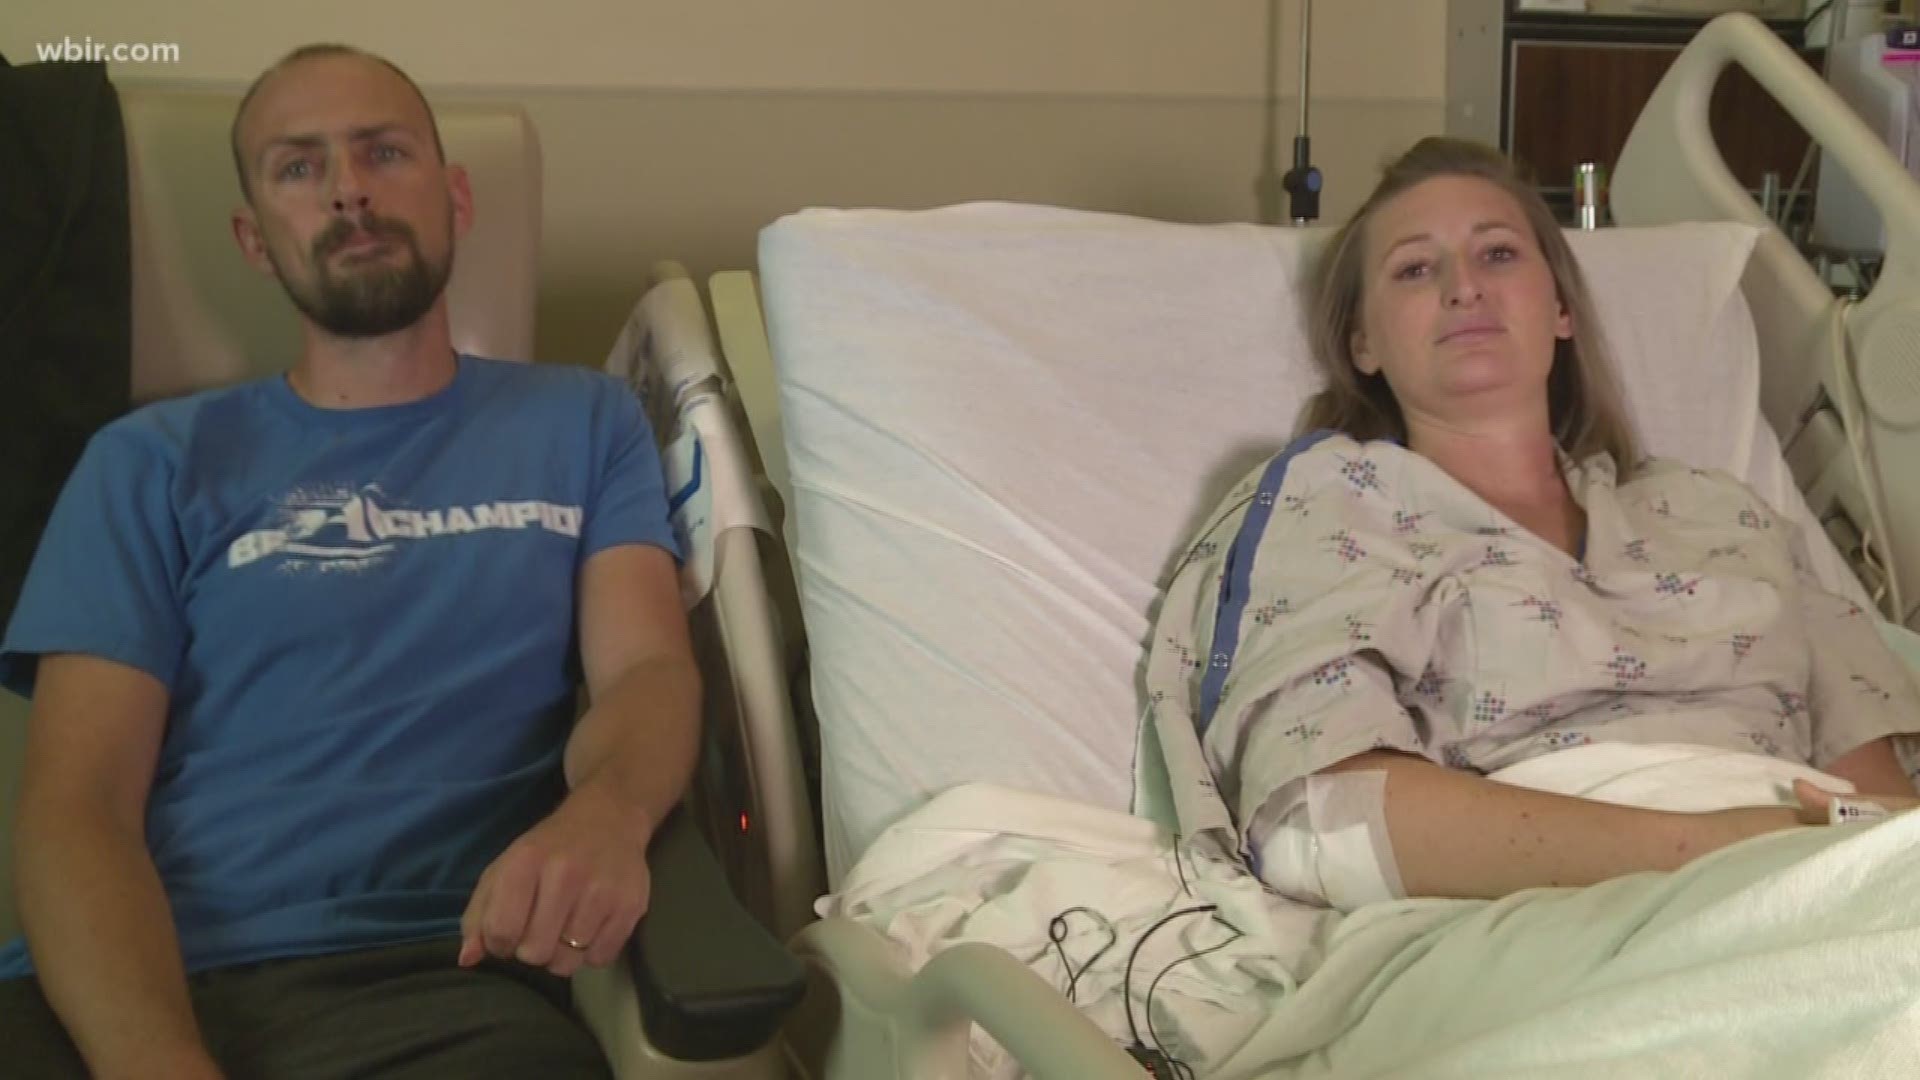 A Knoxville mother is thankful her children are okay after a horrific car accident left her with broken bones and needing surgery.